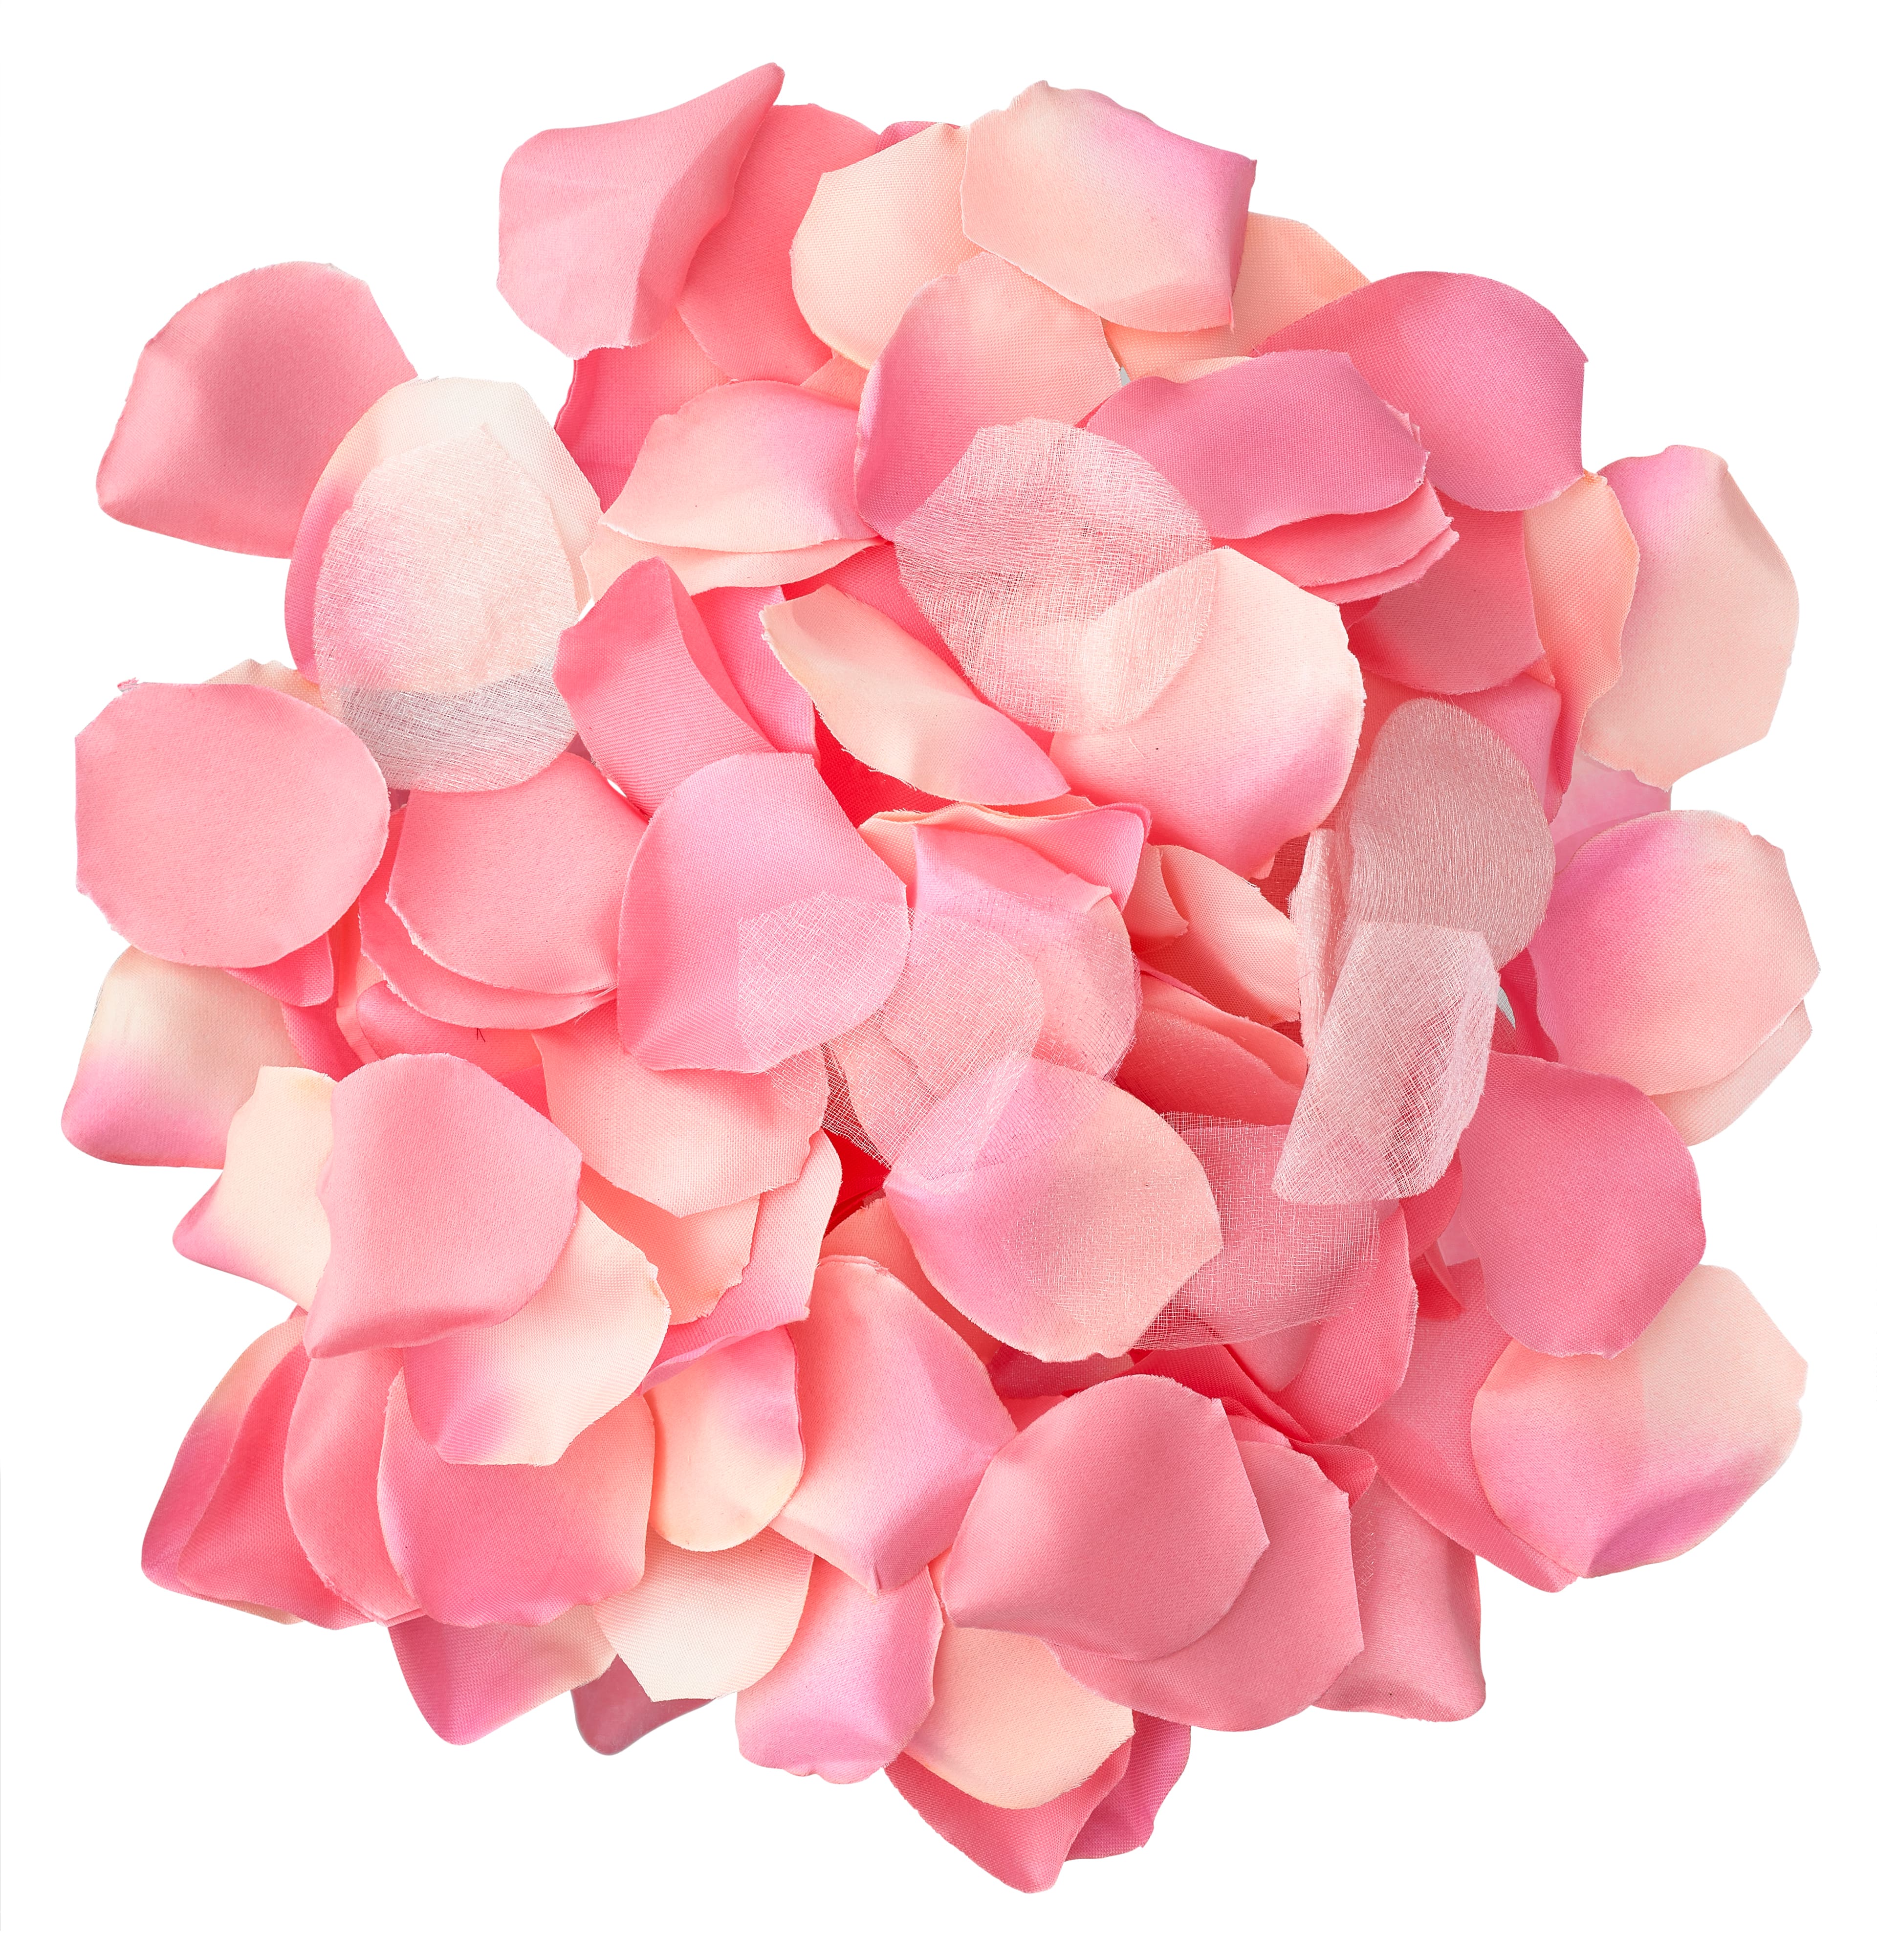 12 Pack: Occasions Pink Decorative Rose Petals by Celebrate It™ - image 1 of 3